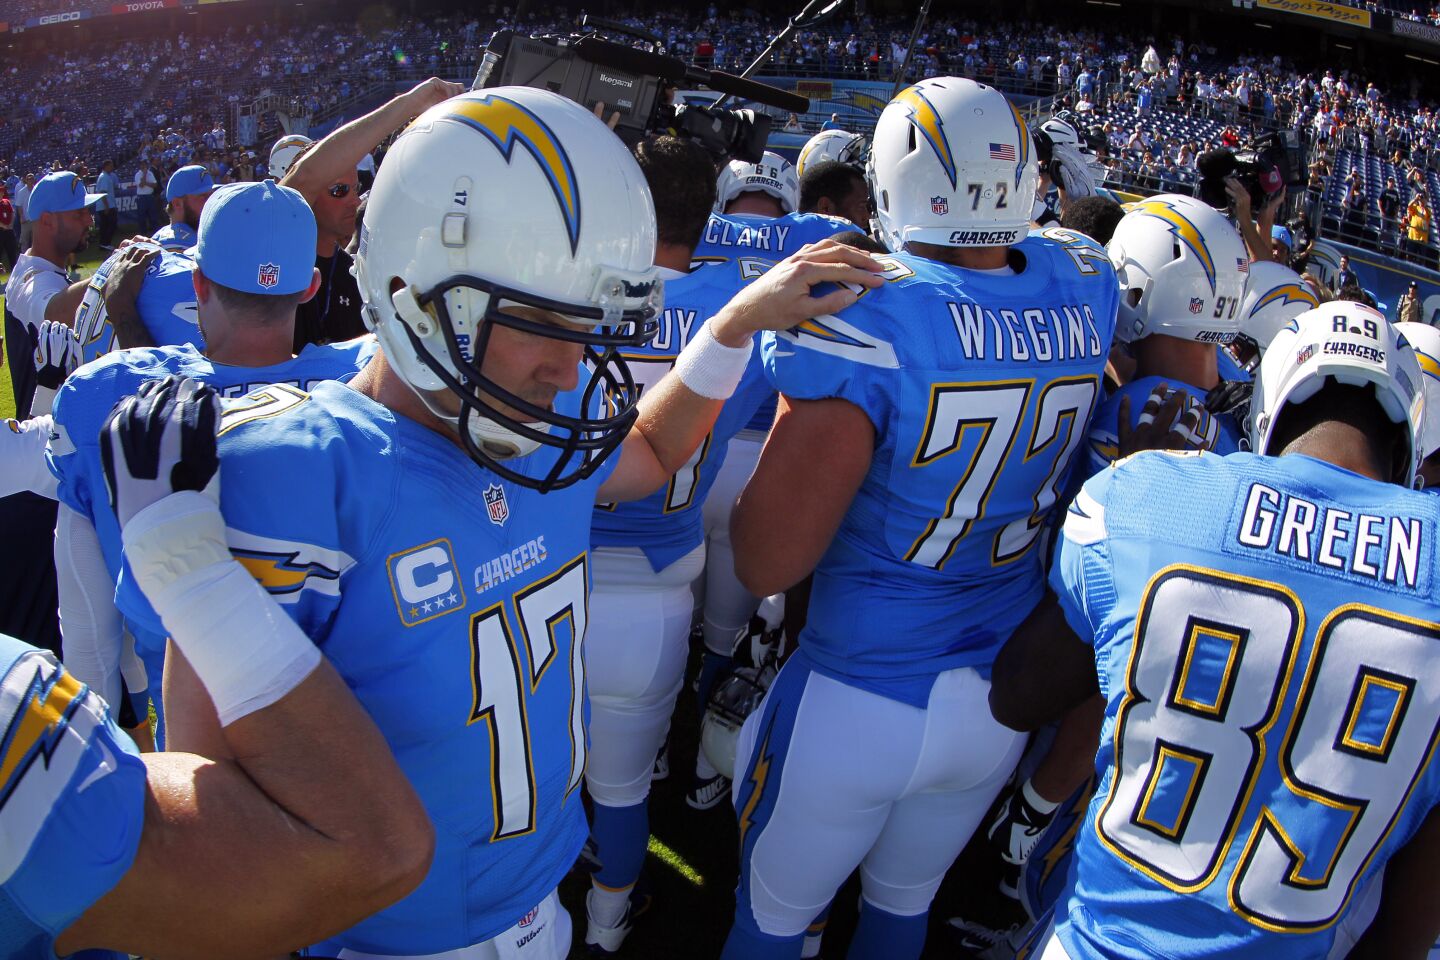 Chargers quarterback Philip Rivers gathers with his team before a game against the Cincinnati Bengals at Qualcomm Stadium on Dec. 1, 2013